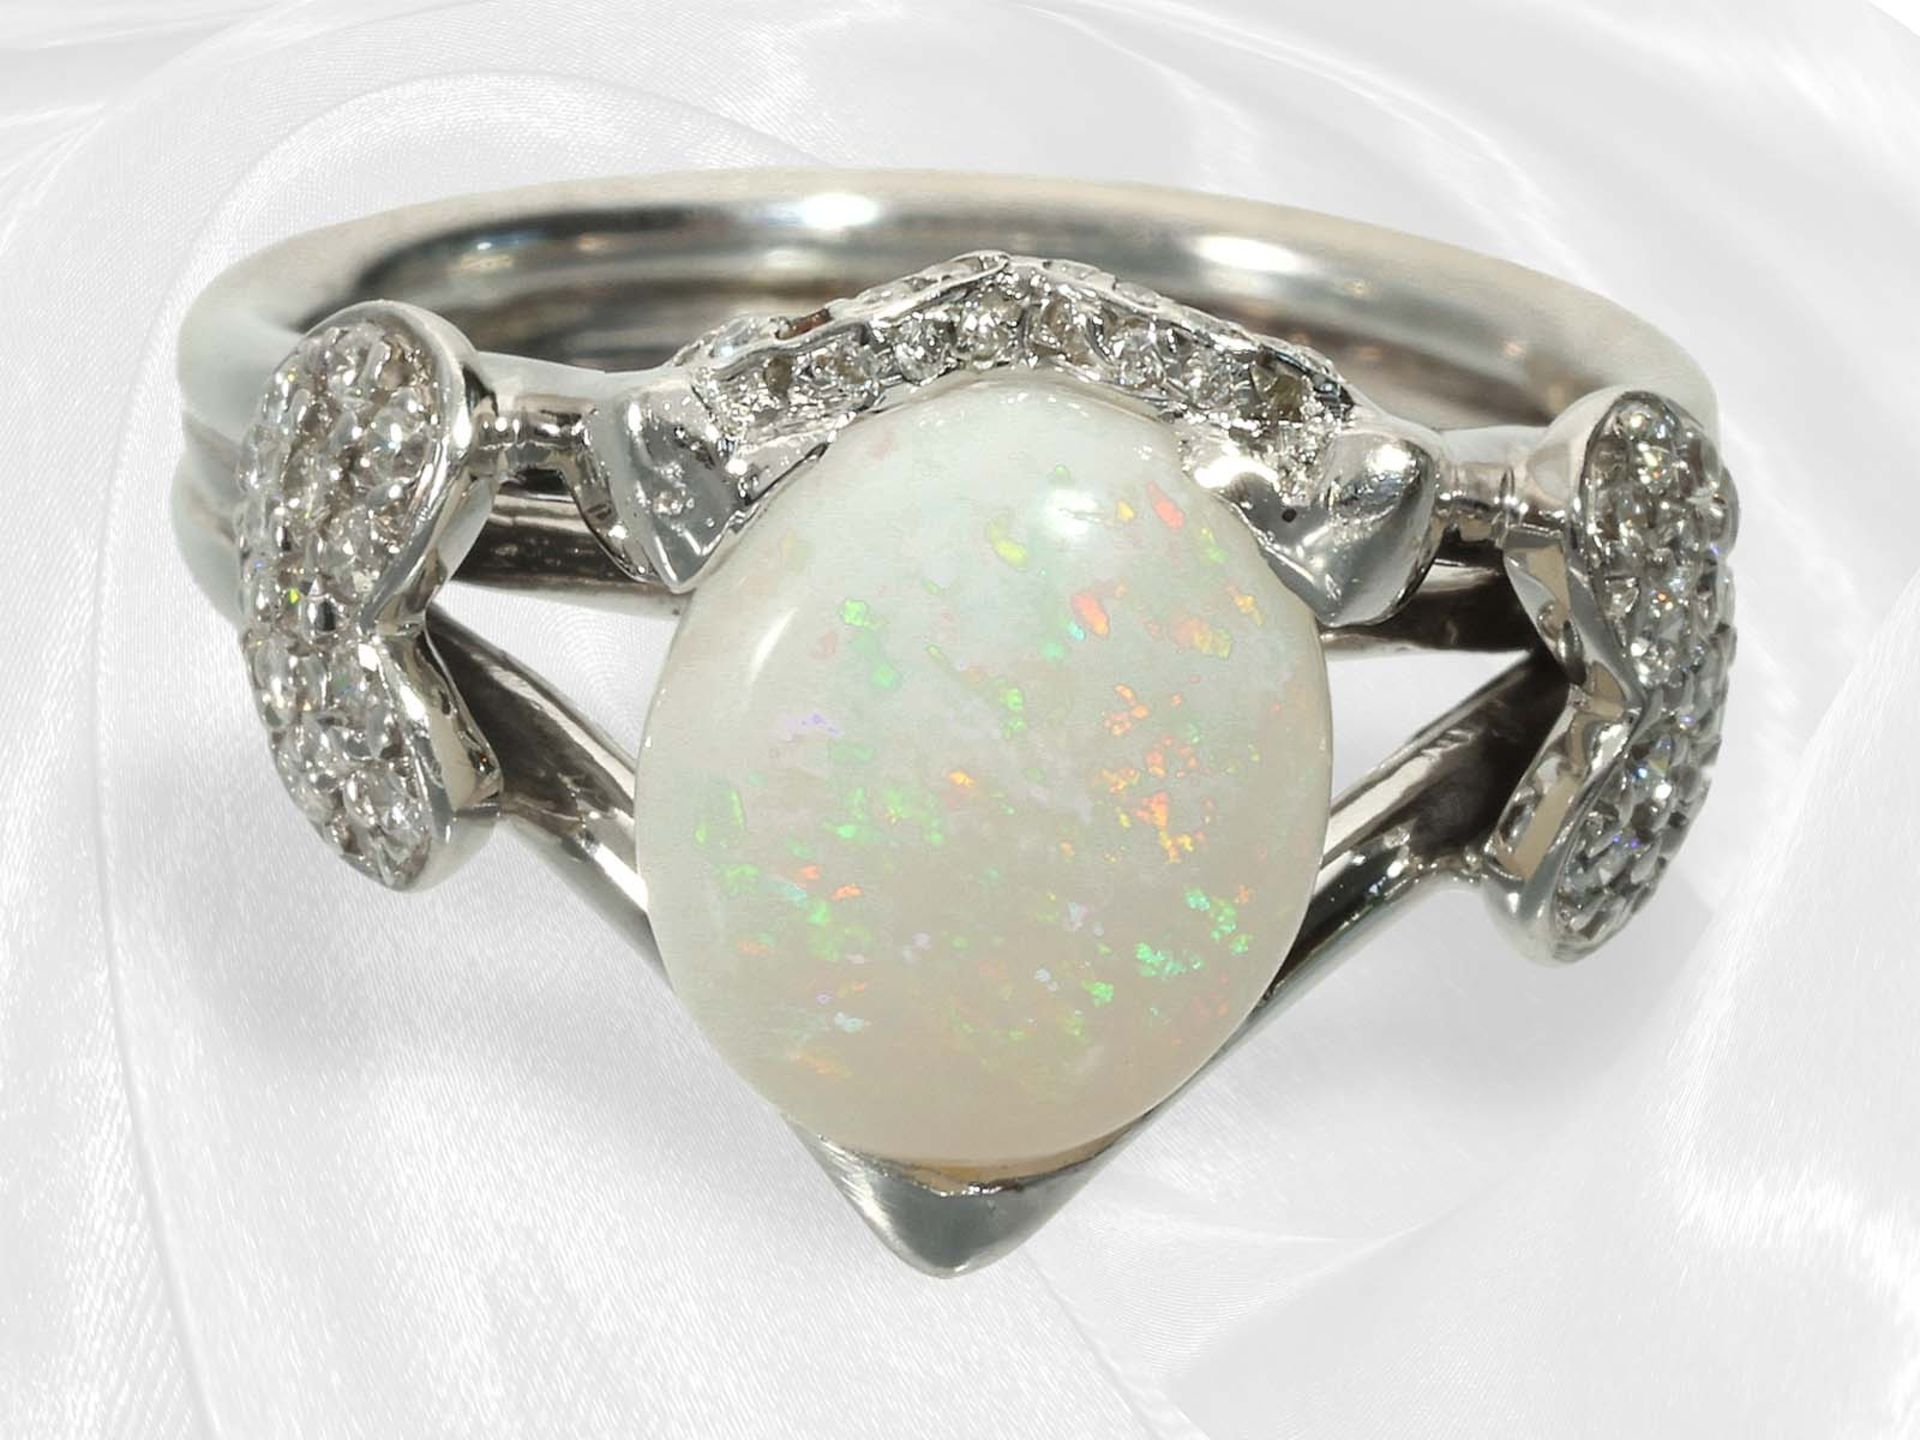 Fancy designer goldsmith ring with opal and brilliant-cut diamonds, "Hearts", 18K white gold, handma - Image 2 of 5